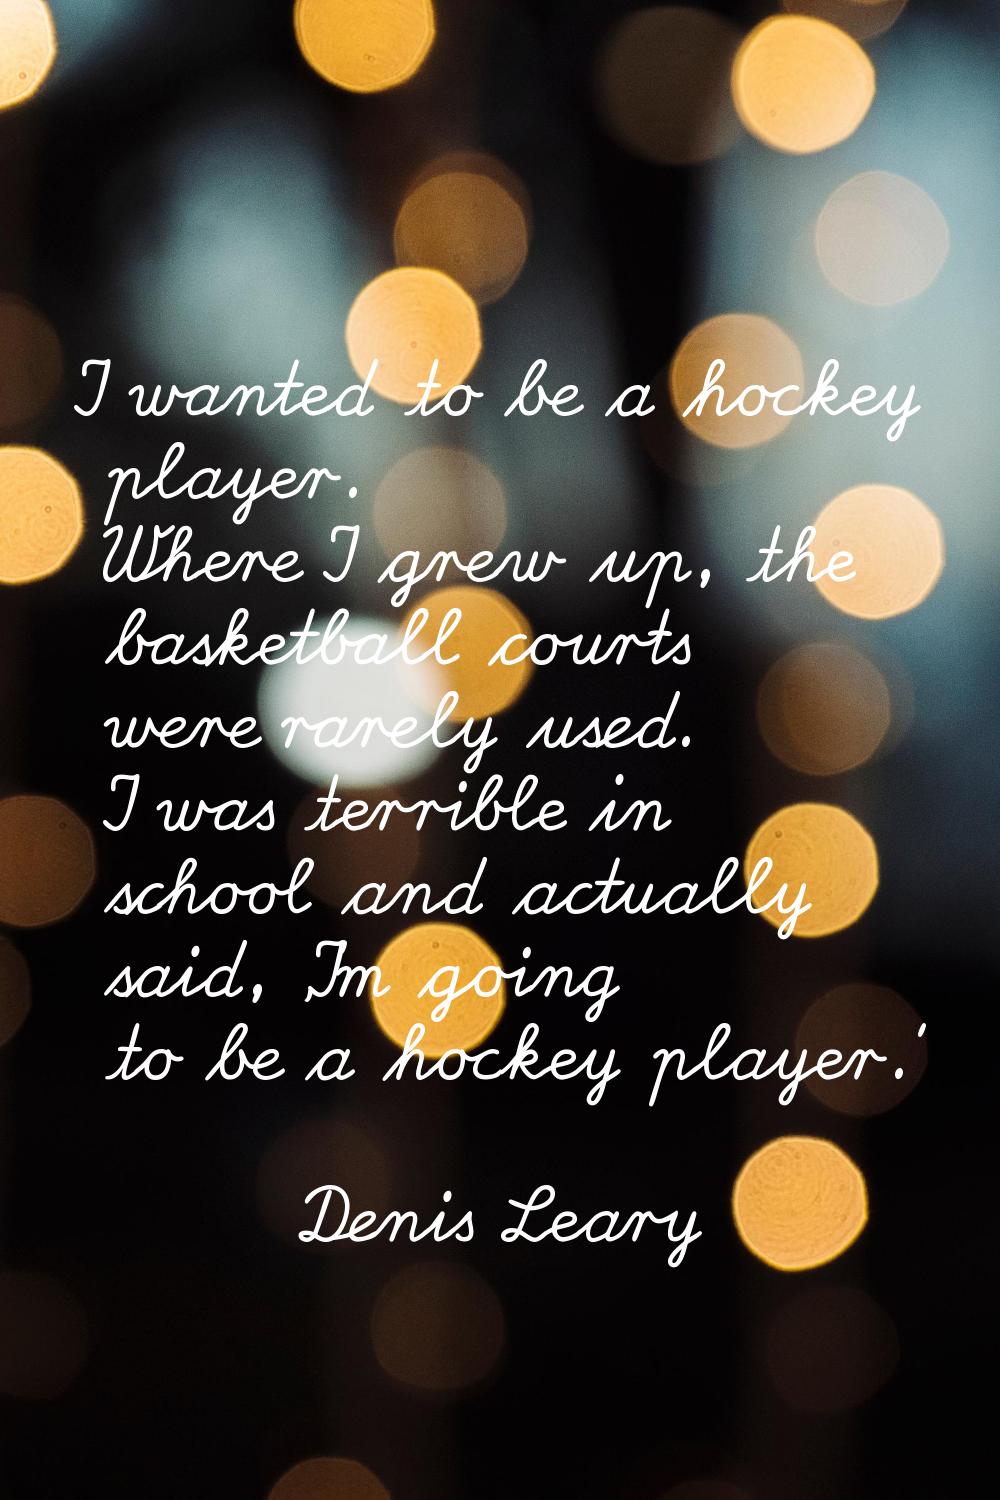 I wanted to be a hockey player. Where I grew up, the basketball courts were rarely used. I was terr